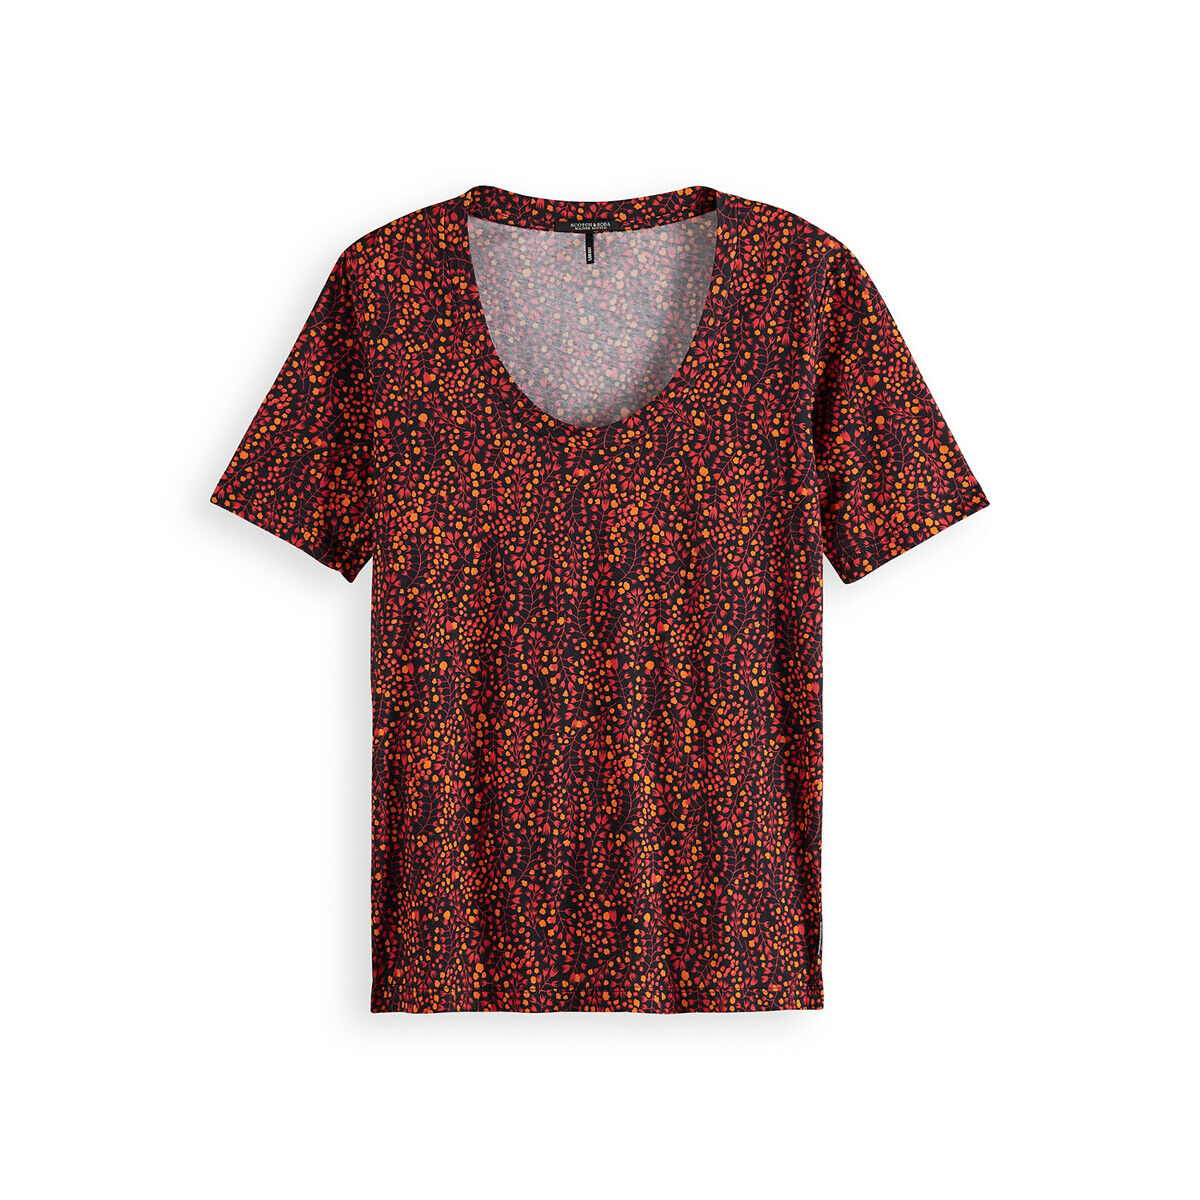 SCOTCH AND SODA Tee shirt col rond manches courtes imprimé floral